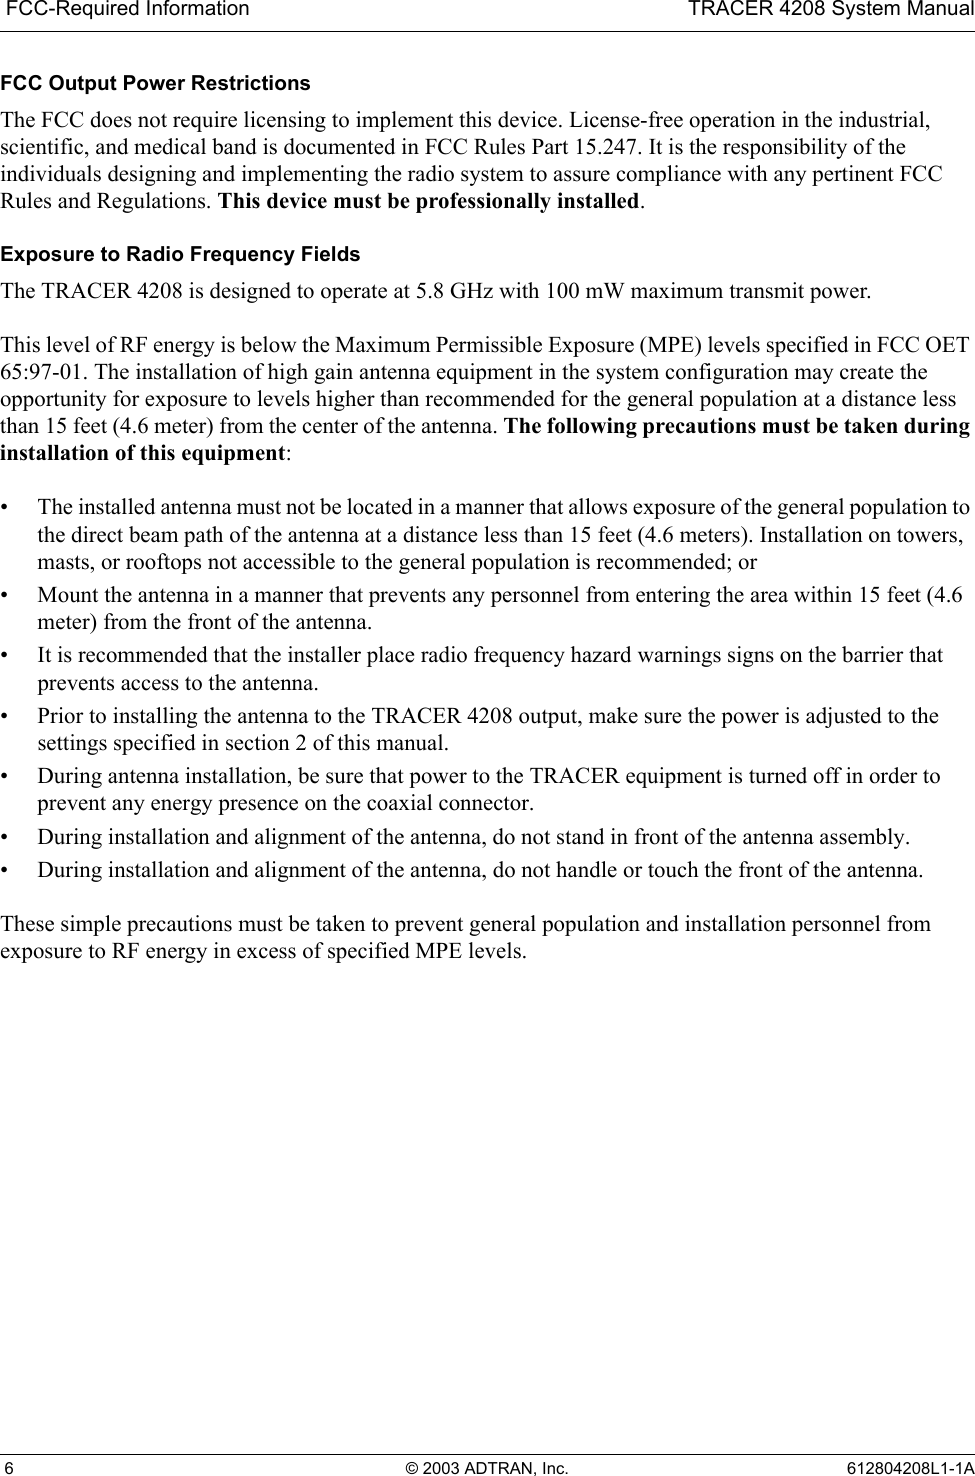  FCC-Required Information TRACER 4208 System Manual 6 © 2003 ADTRAN, Inc. 612804208L1-1AFCC Output Power RestrictionsThe FCC does not require licensing to implement this device. License-free operation in the industrial, scientific, and medical band is documented in FCC Rules Part 15.247. It is the responsibility of the individuals designing and implementing the radio system to assure compliance with any pertinent FCC Rules and Regulations. This device must be professionally installed.Exposure to Radio Frequency FieldsThe TRACER 4208 is designed to operate at 5.8 GHz with 100 mW maximum transmit power.This level of RF energy is below the Maximum Permissible Exposure (MPE) levels specified in FCC OET 65:97-01. The installation of high gain antenna equipment in the system configuration may create the opportunity for exposure to levels higher than recommended for the general population at a distance less than 15 feet (4.6 meter) from the center of the antenna. The following precautions must be taken during installation of this equipment:• The installed antenna must not be located in a manner that allows exposure of the general population to the direct beam path of the antenna at a distance less than 15 feet (4.6 meters). Installation on towers, masts, or rooftops not accessible to the general population is recommended; or• Mount the antenna in a manner that prevents any personnel from entering the area within 15 feet (4.6 meter) from the front of the antenna.• It is recommended that the installer place radio frequency hazard warnings signs on the barrier that prevents access to the antenna.• Prior to installing the antenna to the TRACER 4208 output, make sure the power is adjusted to the settings specified in section 2 of this manual.• During antenna installation, be sure that power to the TRACER equipment is turned off in order to prevent any energy presence on the coaxial connector.• During installation and alignment of the antenna, do not stand in front of the antenna assembly.• During installation and alignment of the antenna, do not handle or touch the front of the antenna.These simple precautions must be taken to prevent general population and installation personnel from exposure to RF energy in excess of specified MPE levels.